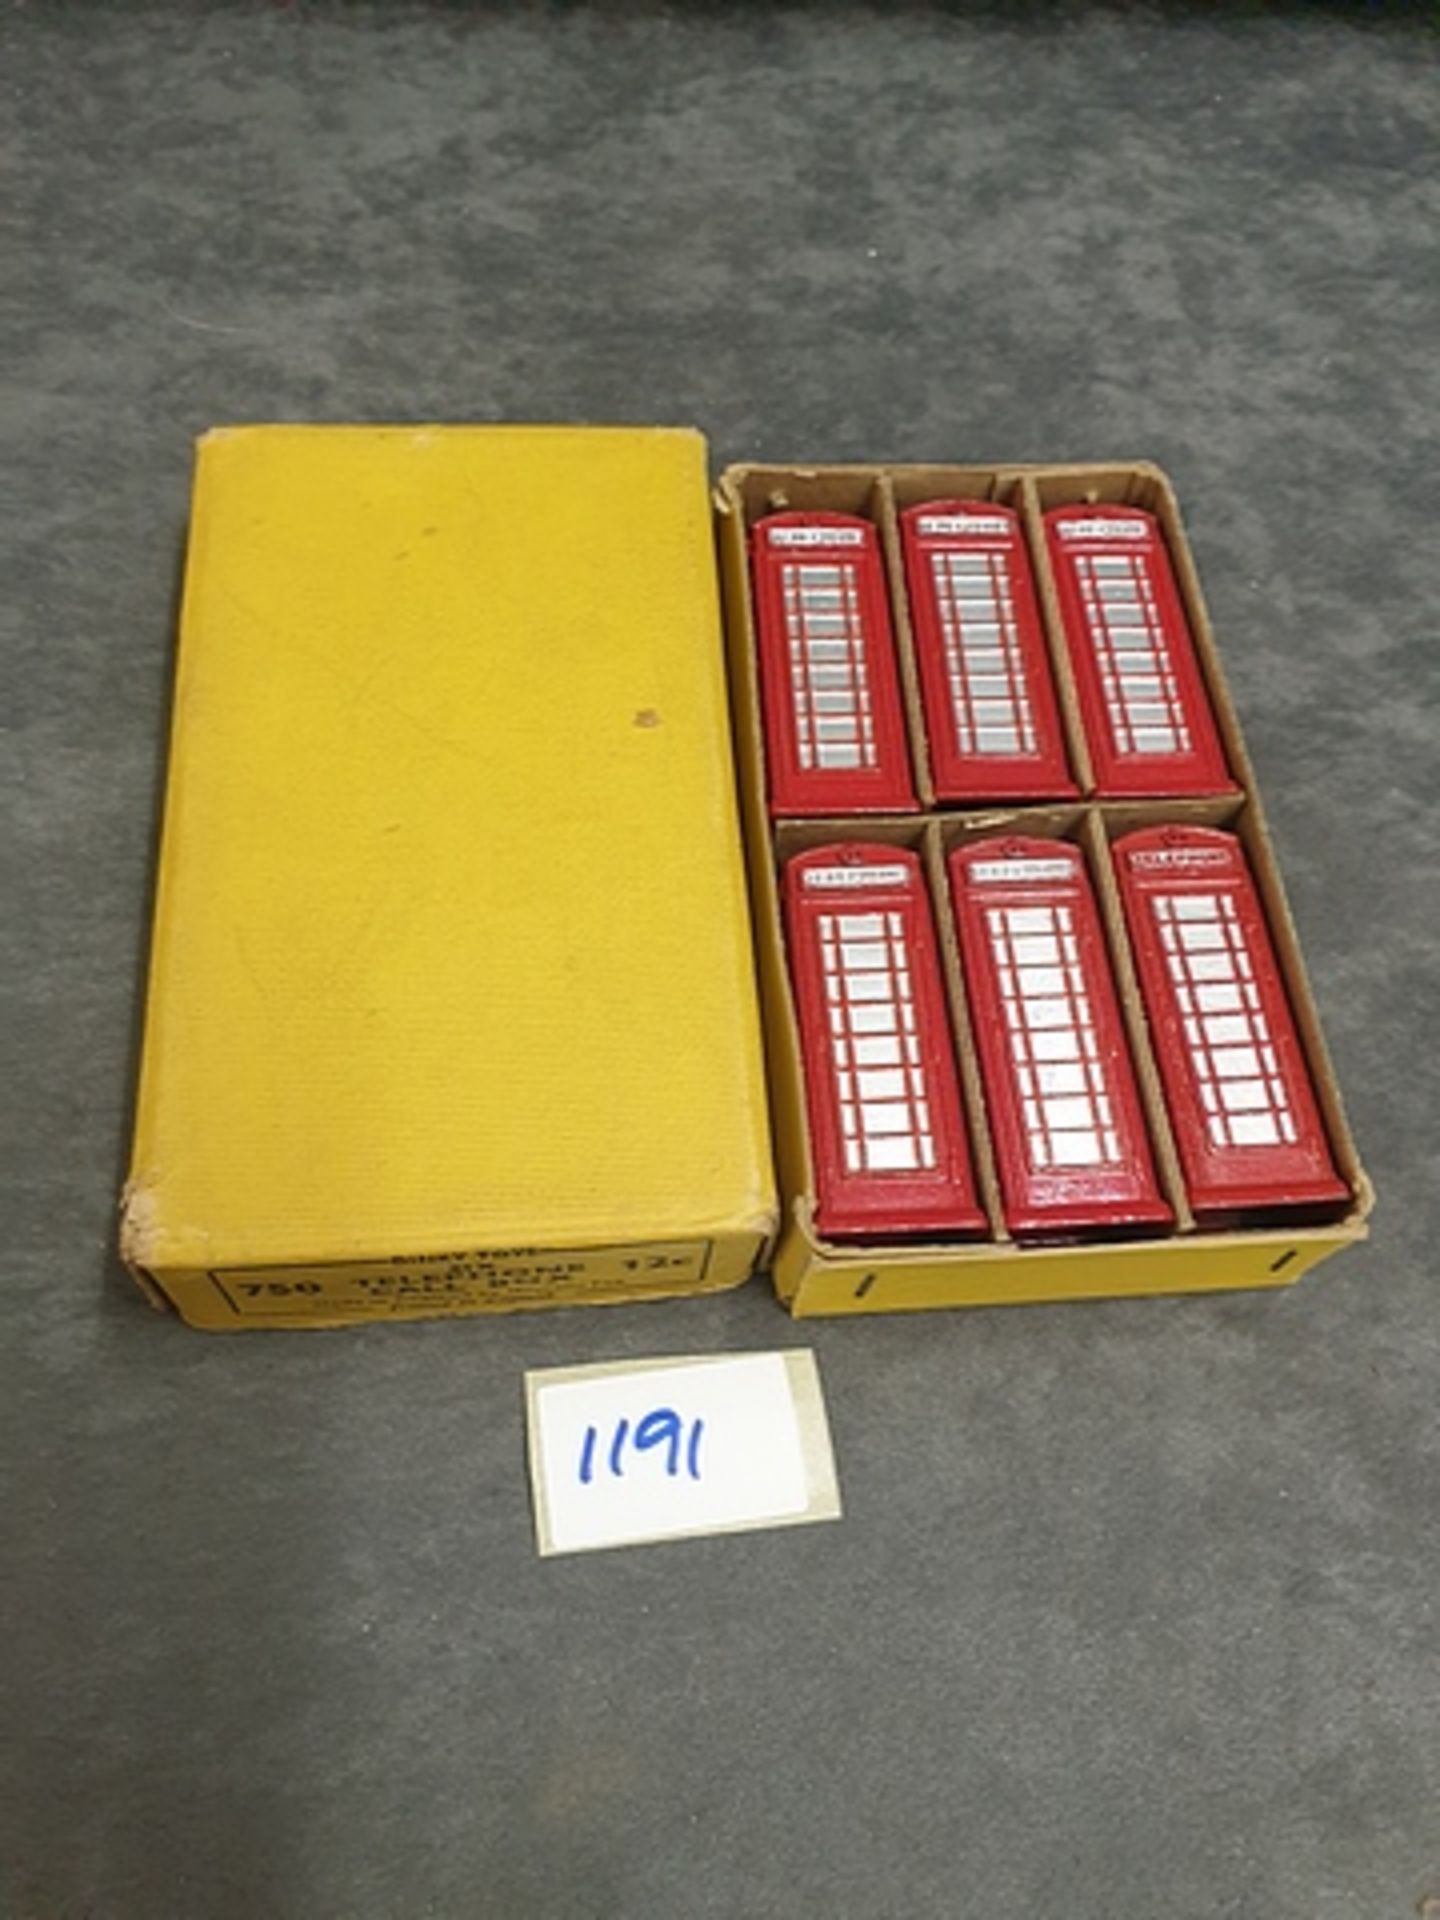 Shop Stock A Set Of 6 Dinky #750 Telephone Call Box In Box - Image 2 of 3